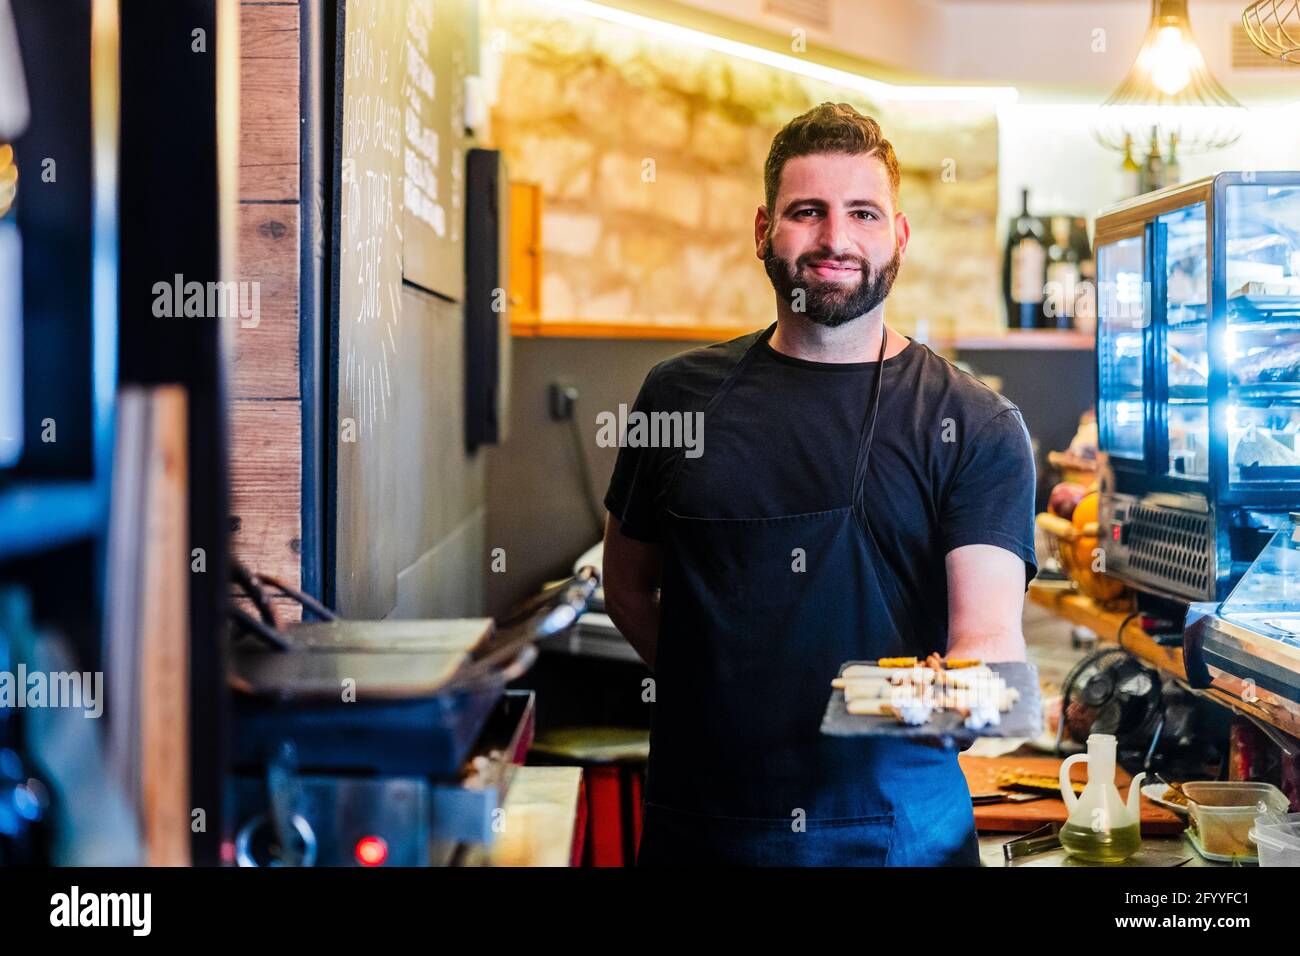 Happy ethnic male with beard demonstrating tray with tasty food while looking at camera in restaurant Stock Photo